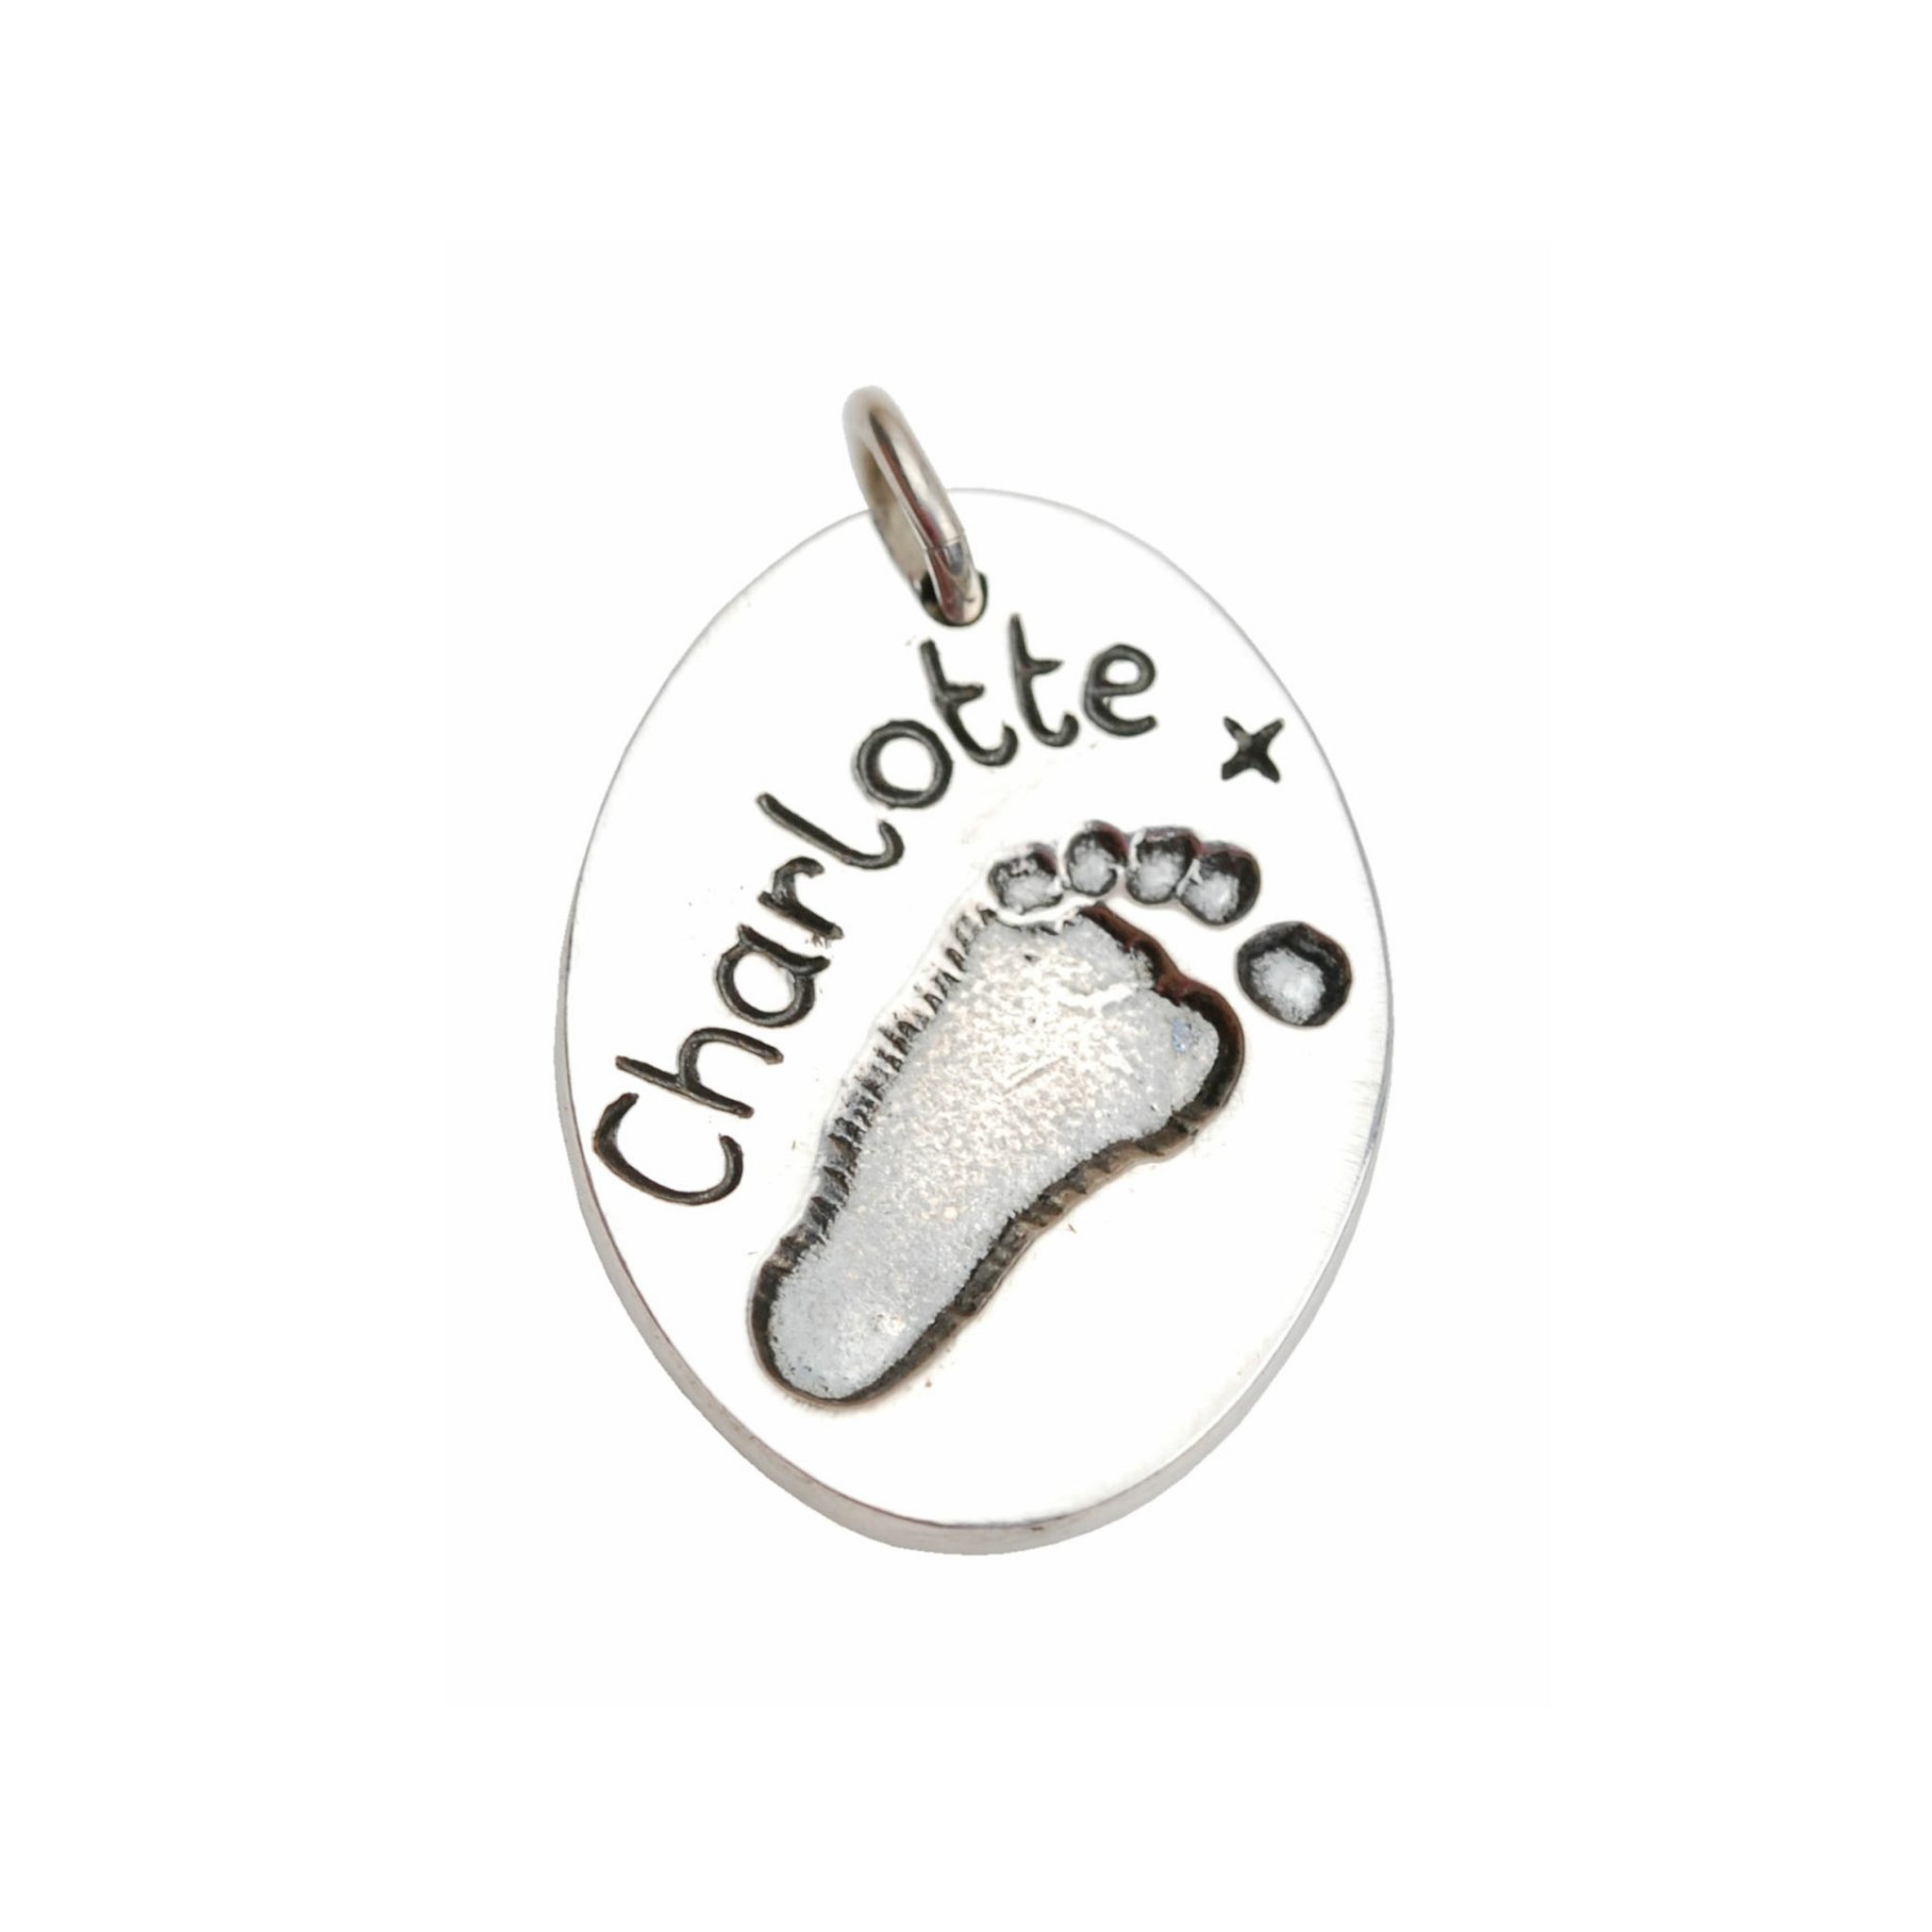 Silver oval charm with footprint